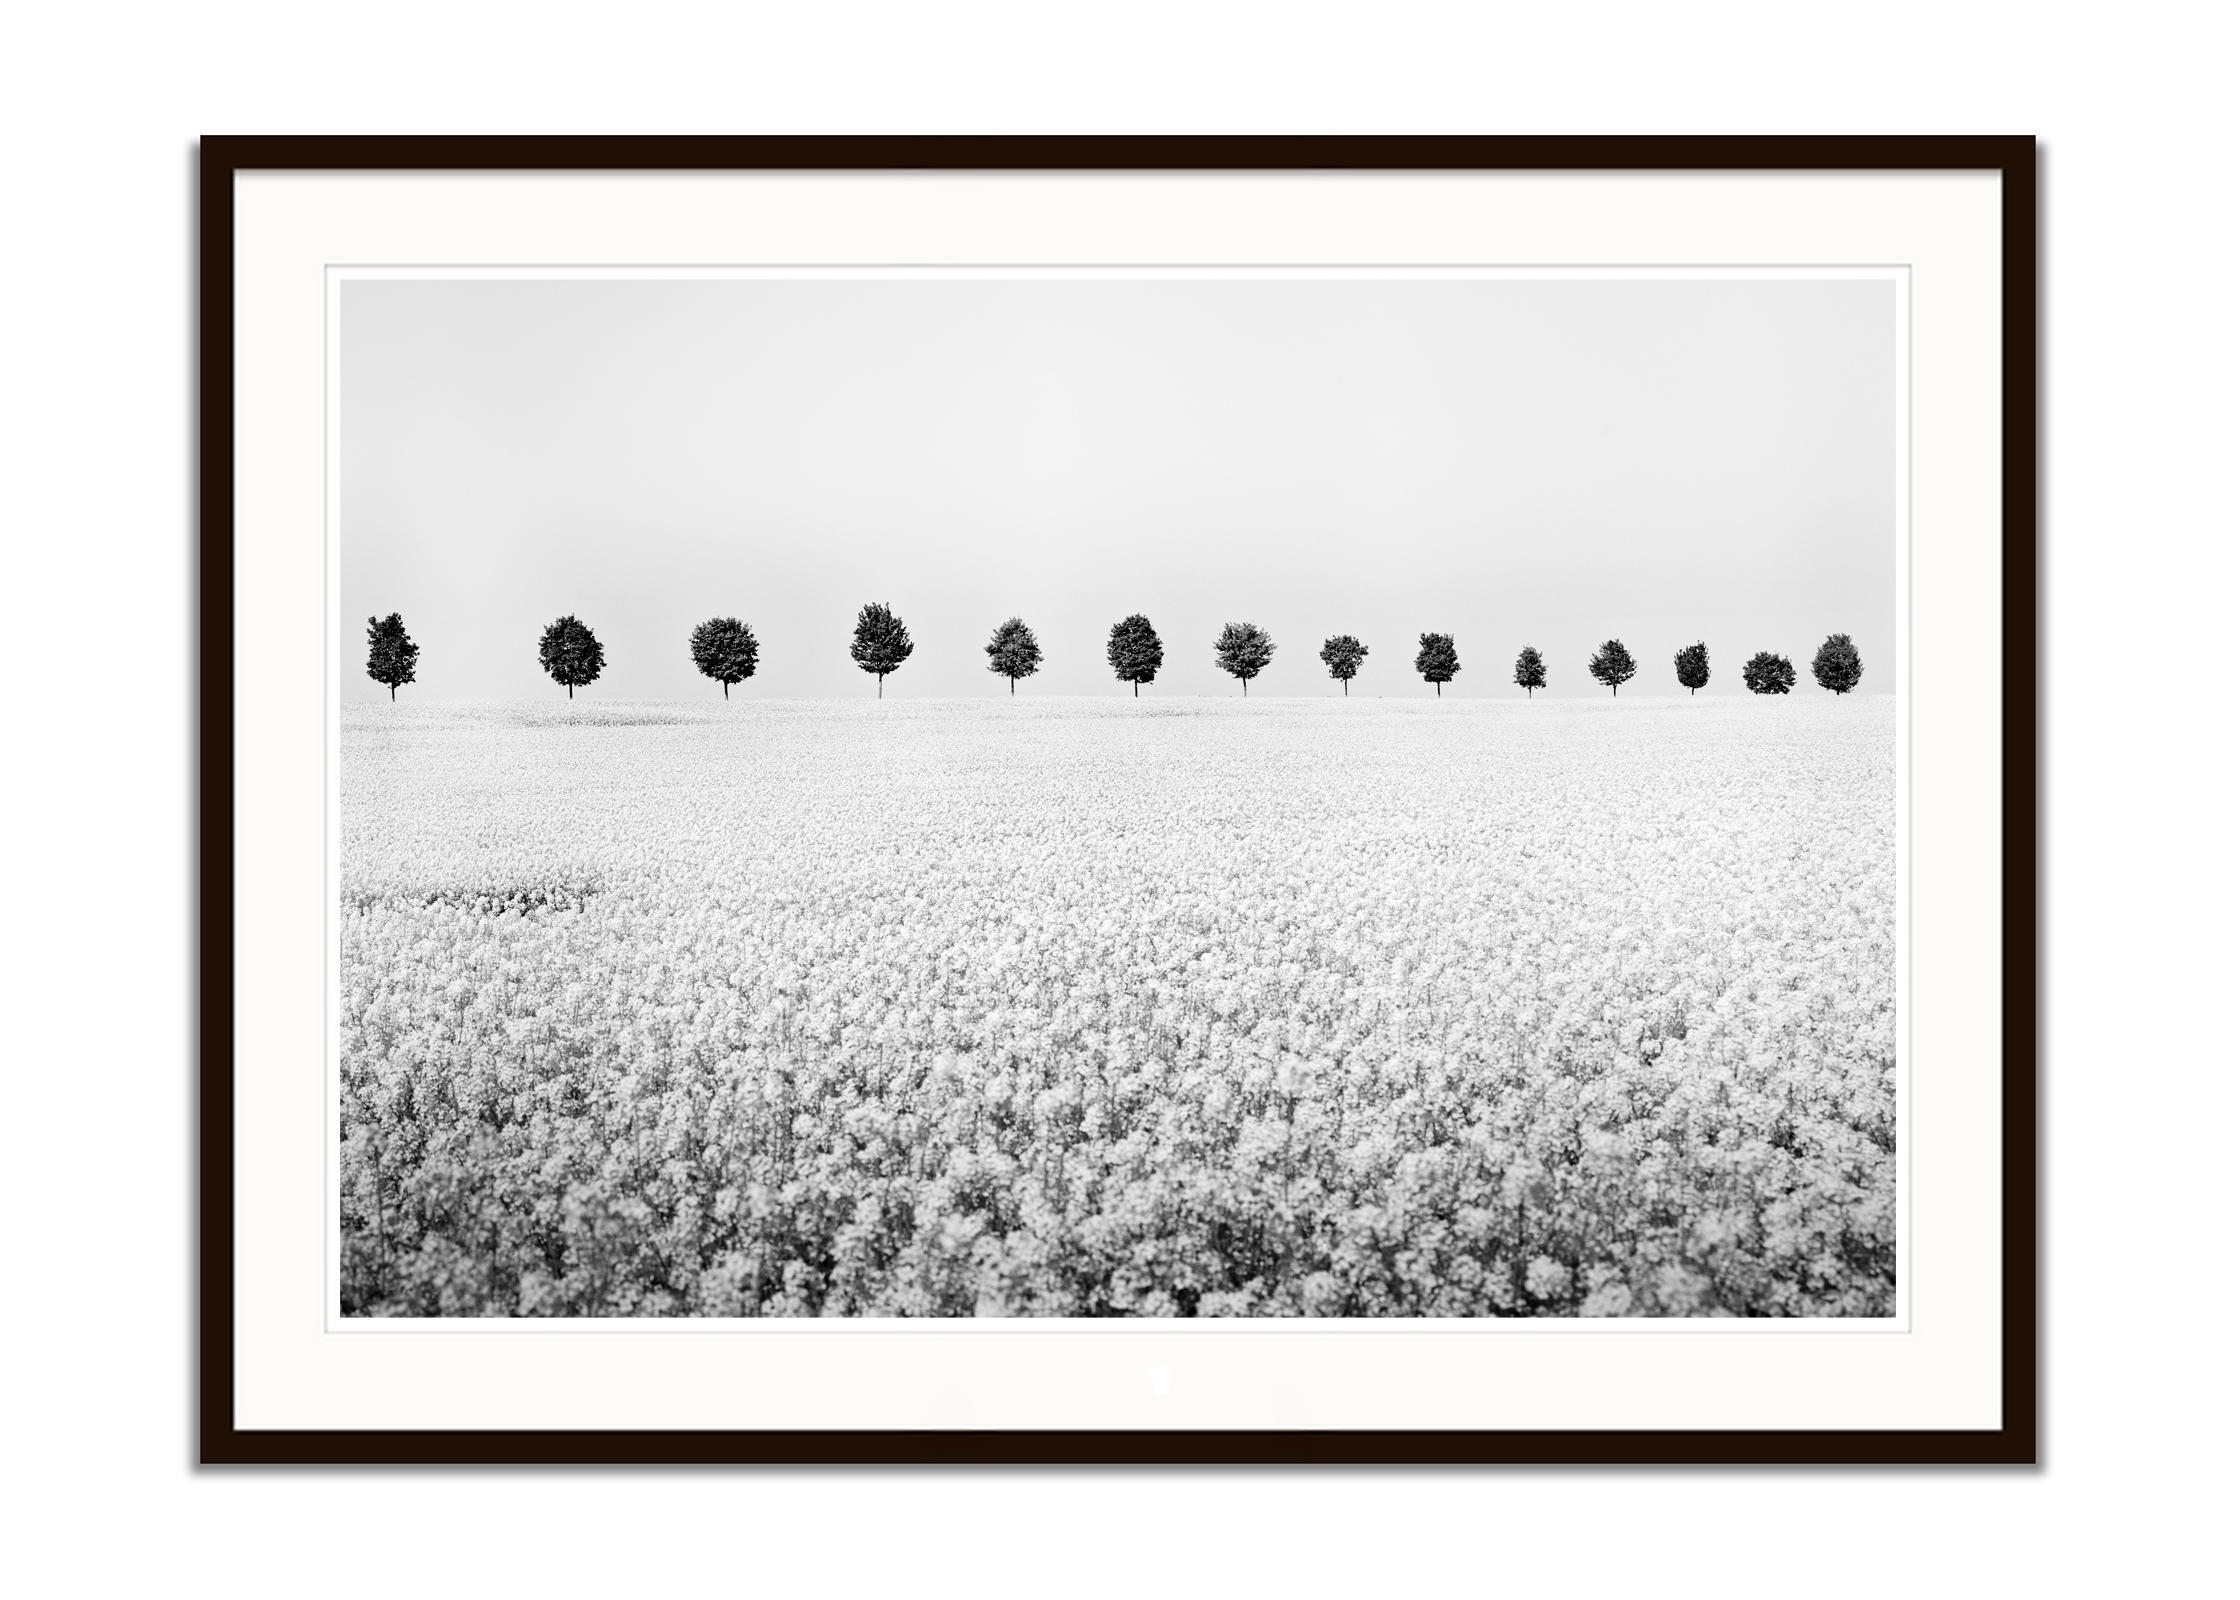 Brassica Napus row of trees black white minimalist landscape fineart photography - Gray Landscape Photograph by Gerald Berghammer